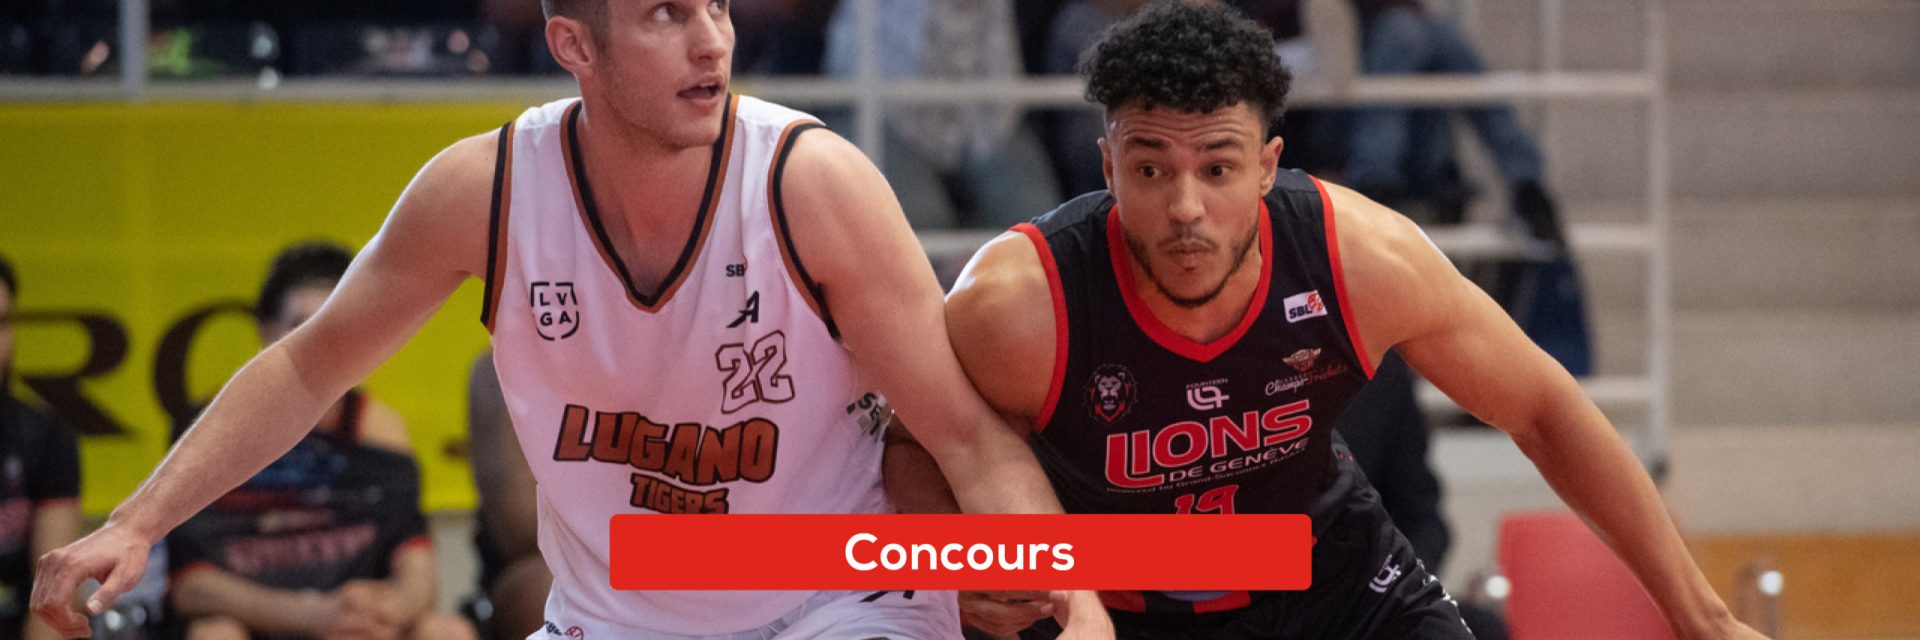 unireso-RS-concours-LIONS2